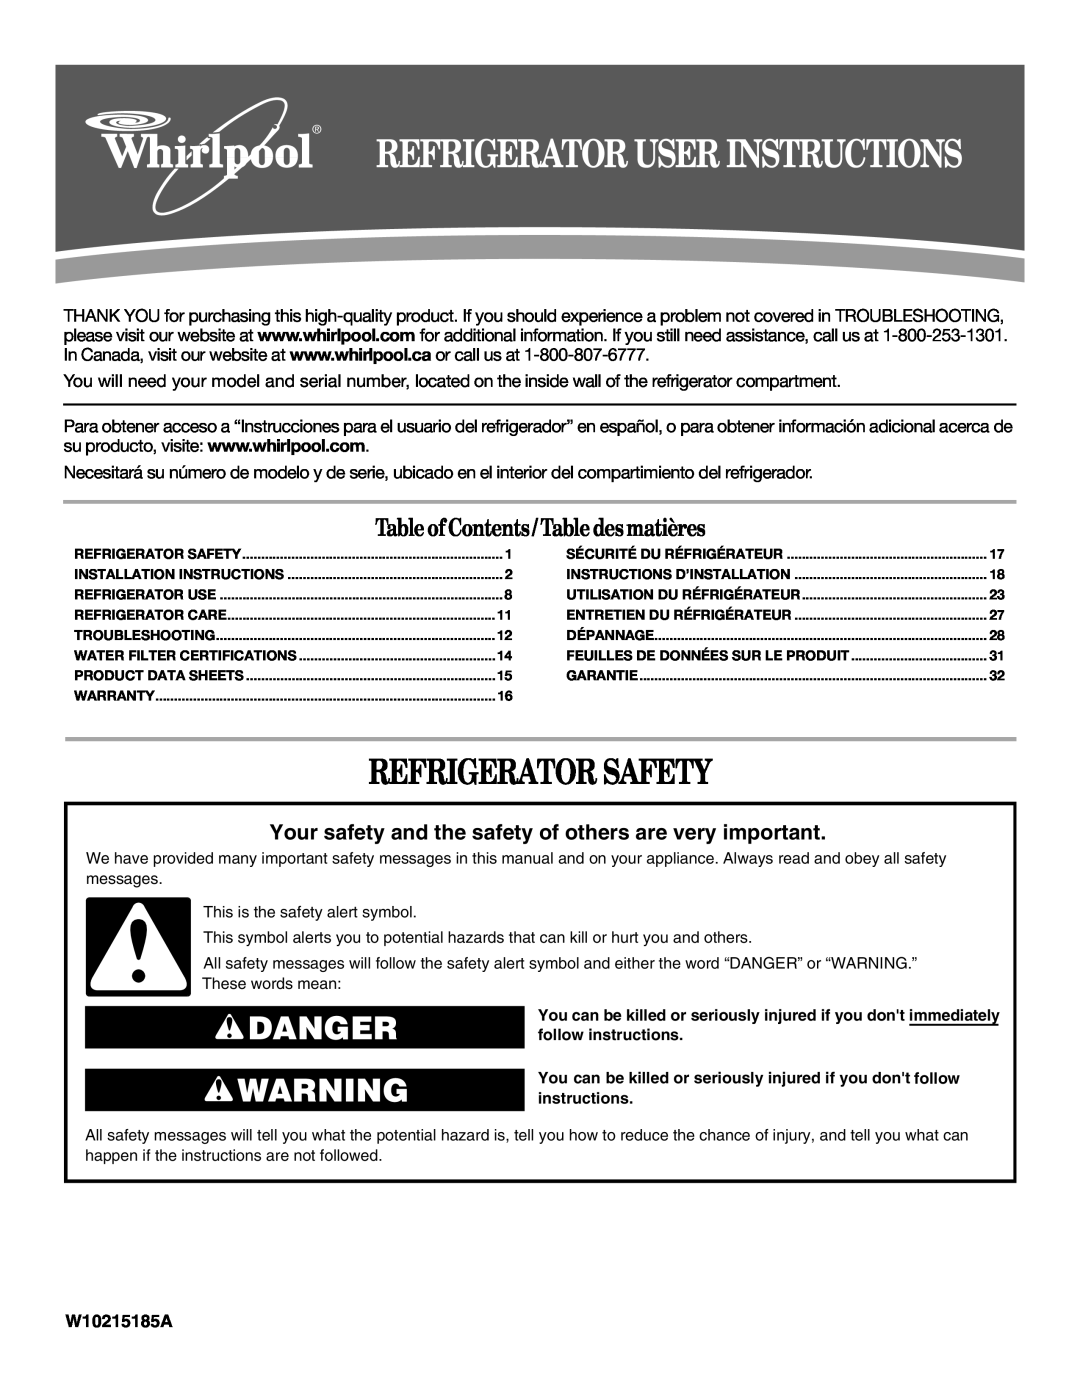 Whirlpool W10215185A installation instructions Refrigerator Safety, Danger, Table of Contents / Table desmatières 